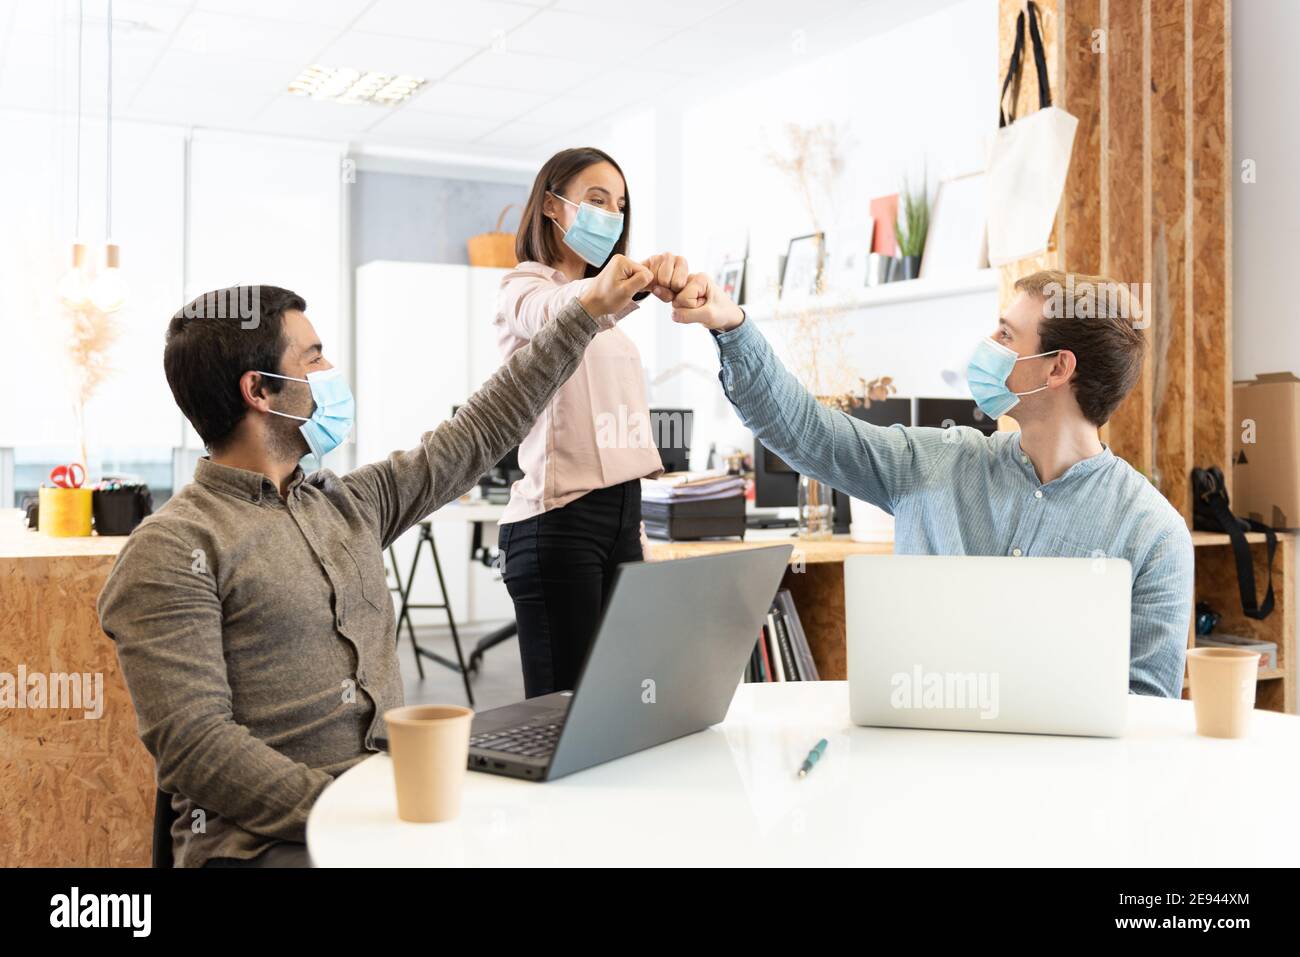 Coworkers wearing face masks celebrating and fist bumping. Working in the office during Coronavirus pandemic concept. Stock Photo